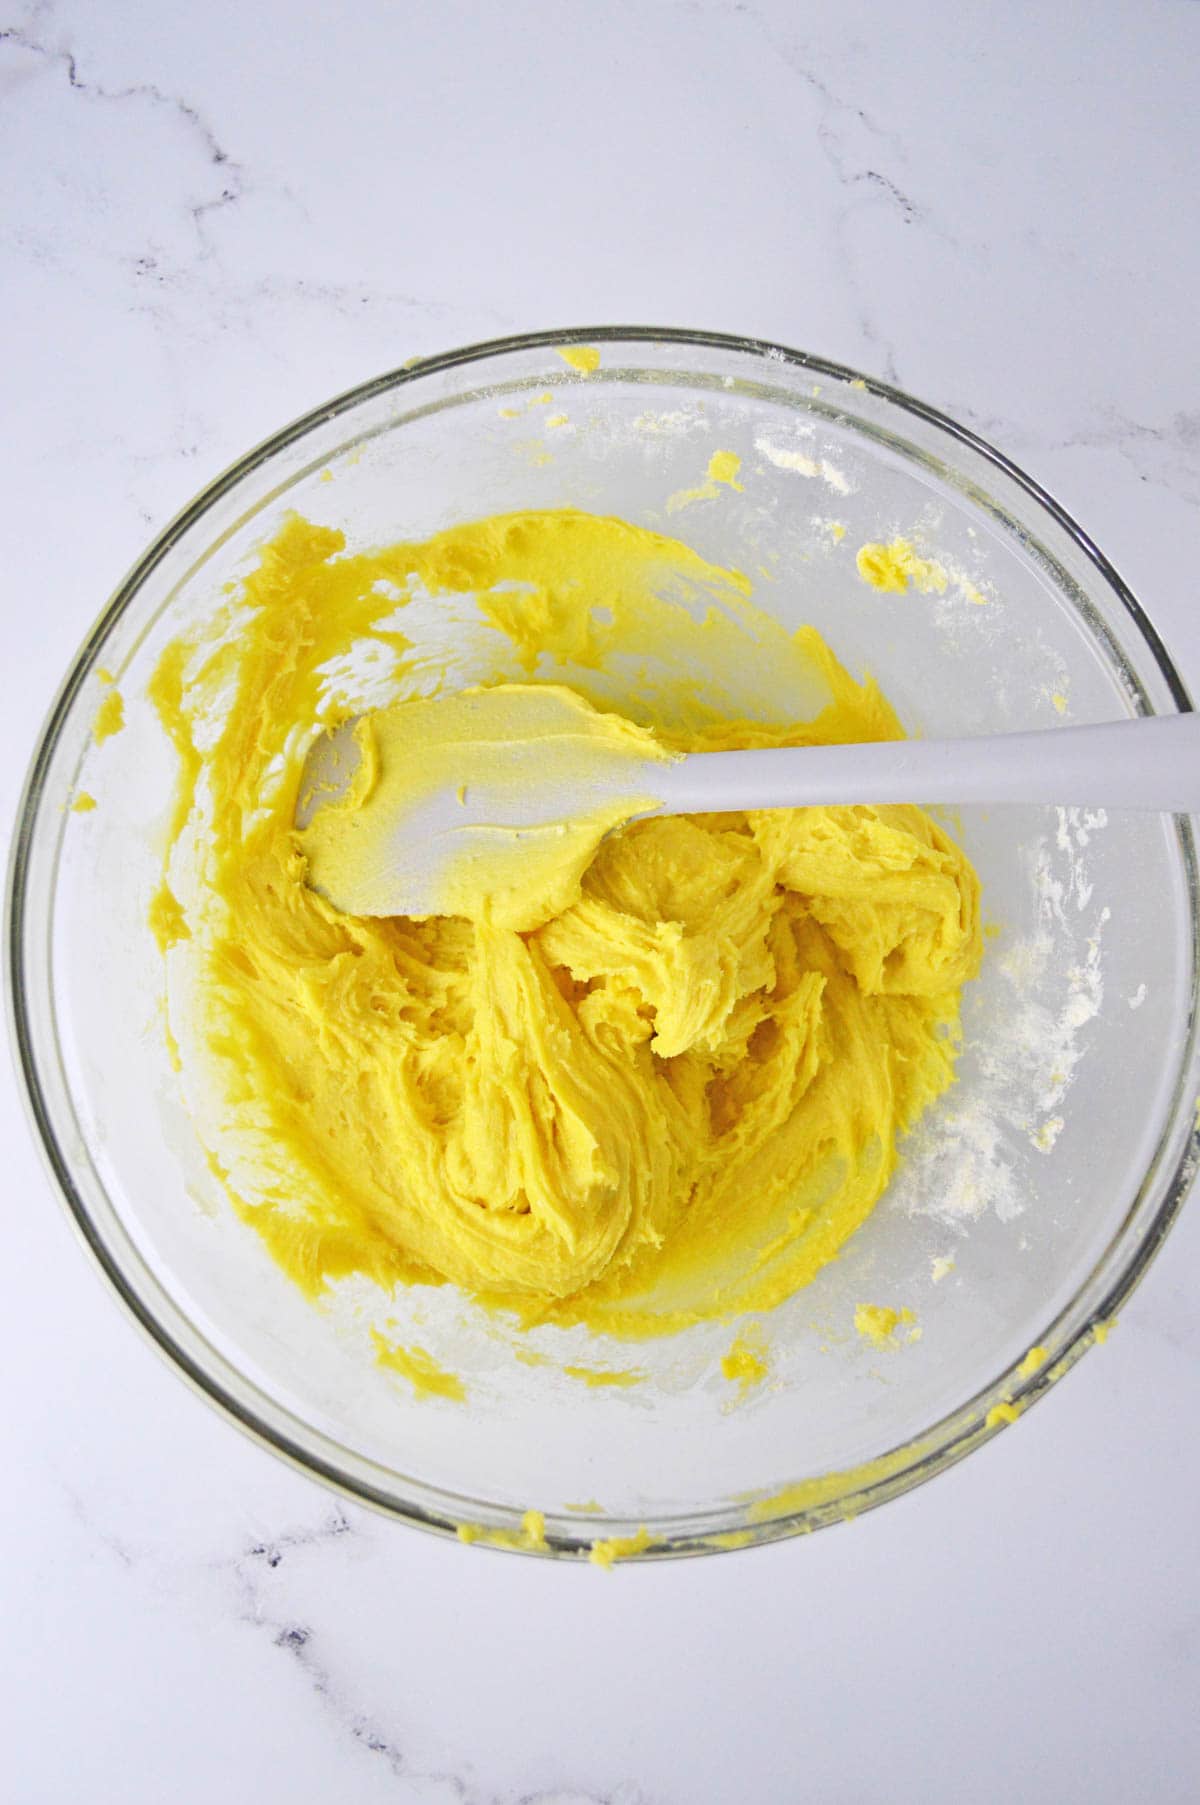 Lemon cake mix with eggs and butter in glass bowl